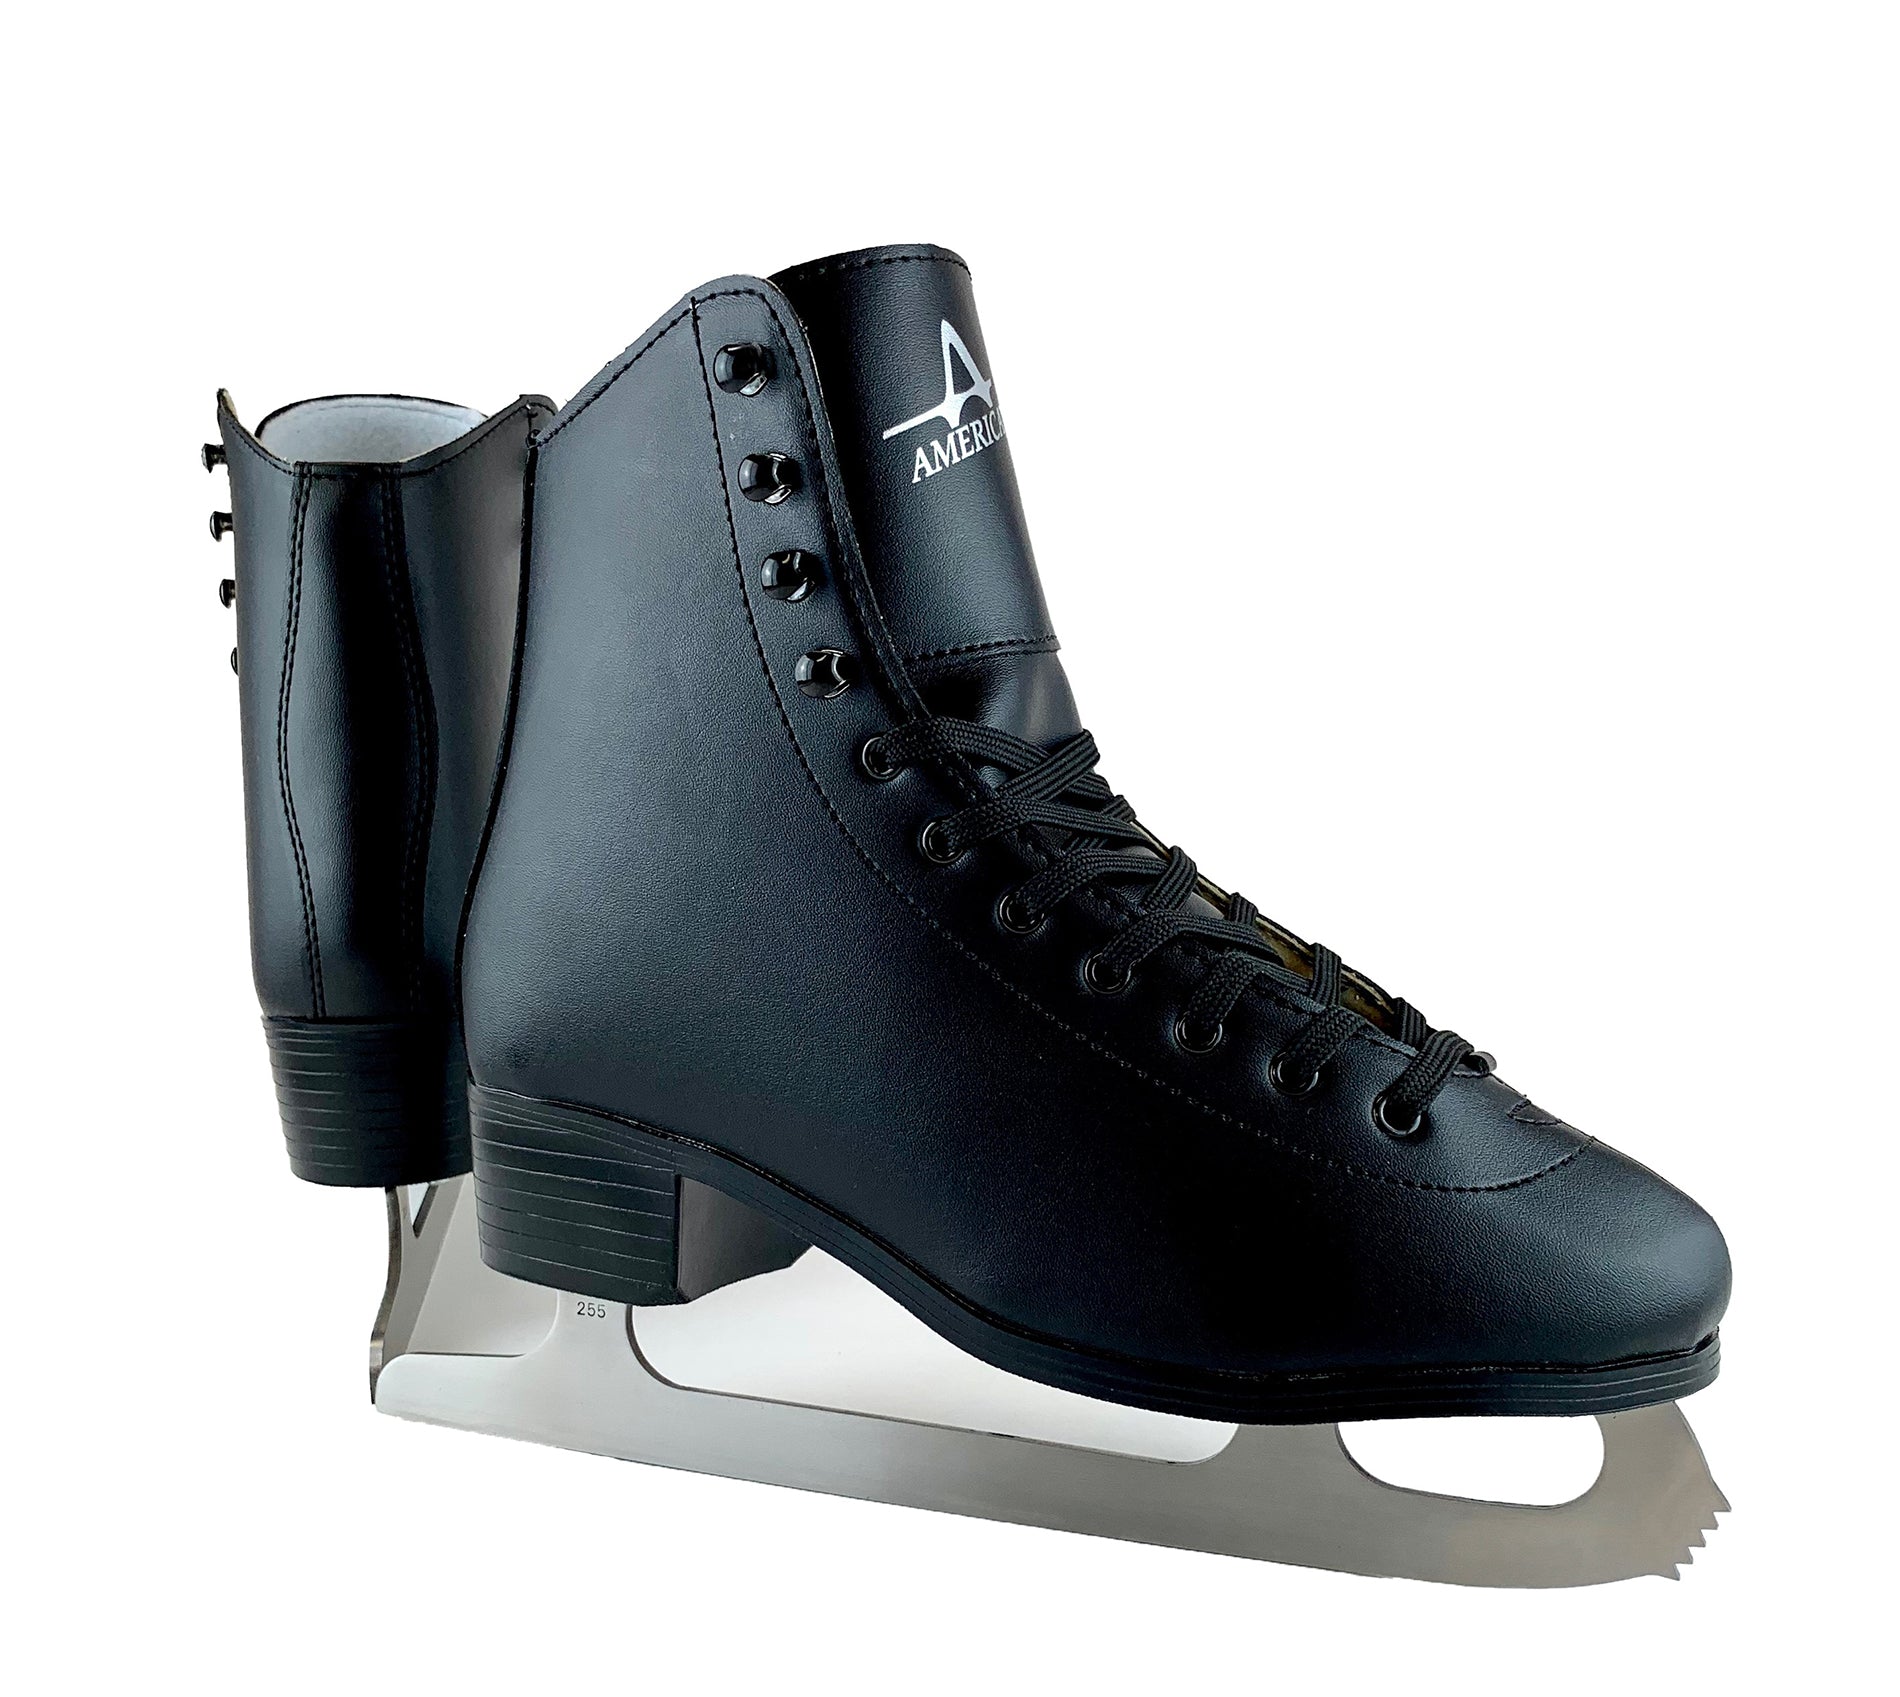 Men's American Leather Lined Figure Skate